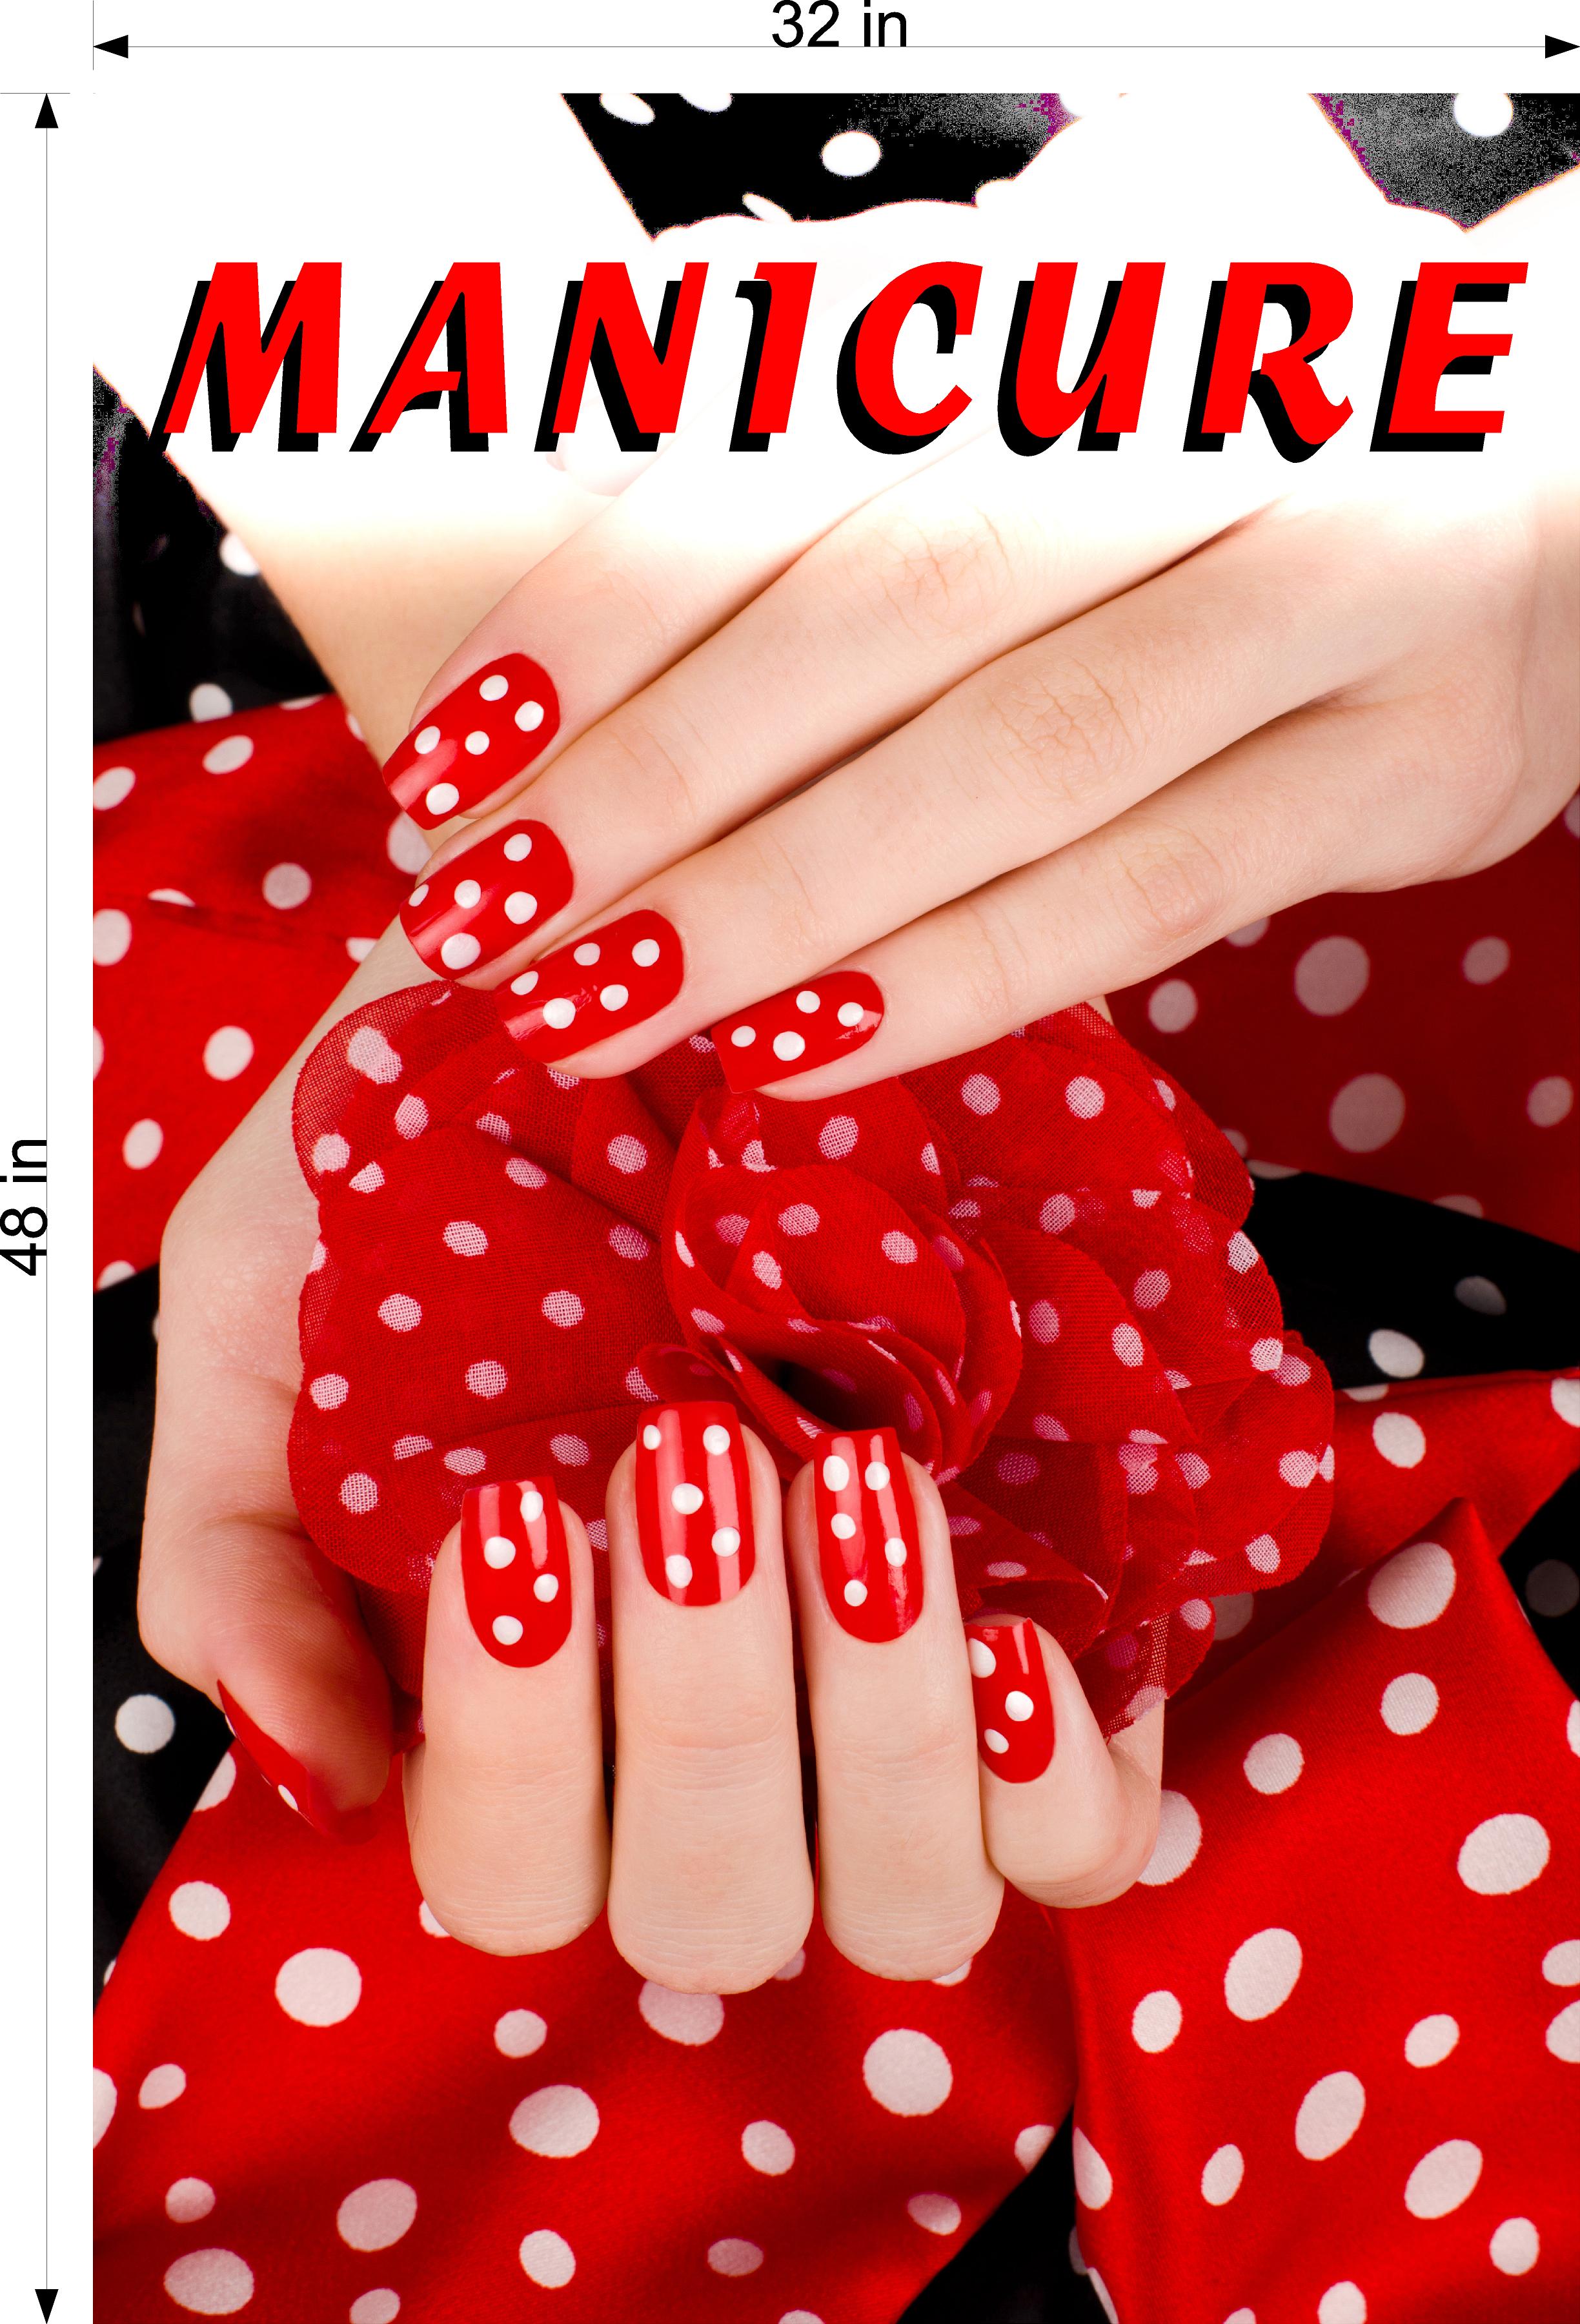 Manicure 15 Wallpaper Poster Decal with Adhesive Backing Wall Sticker Decor Indoors Interior Sign Vertical